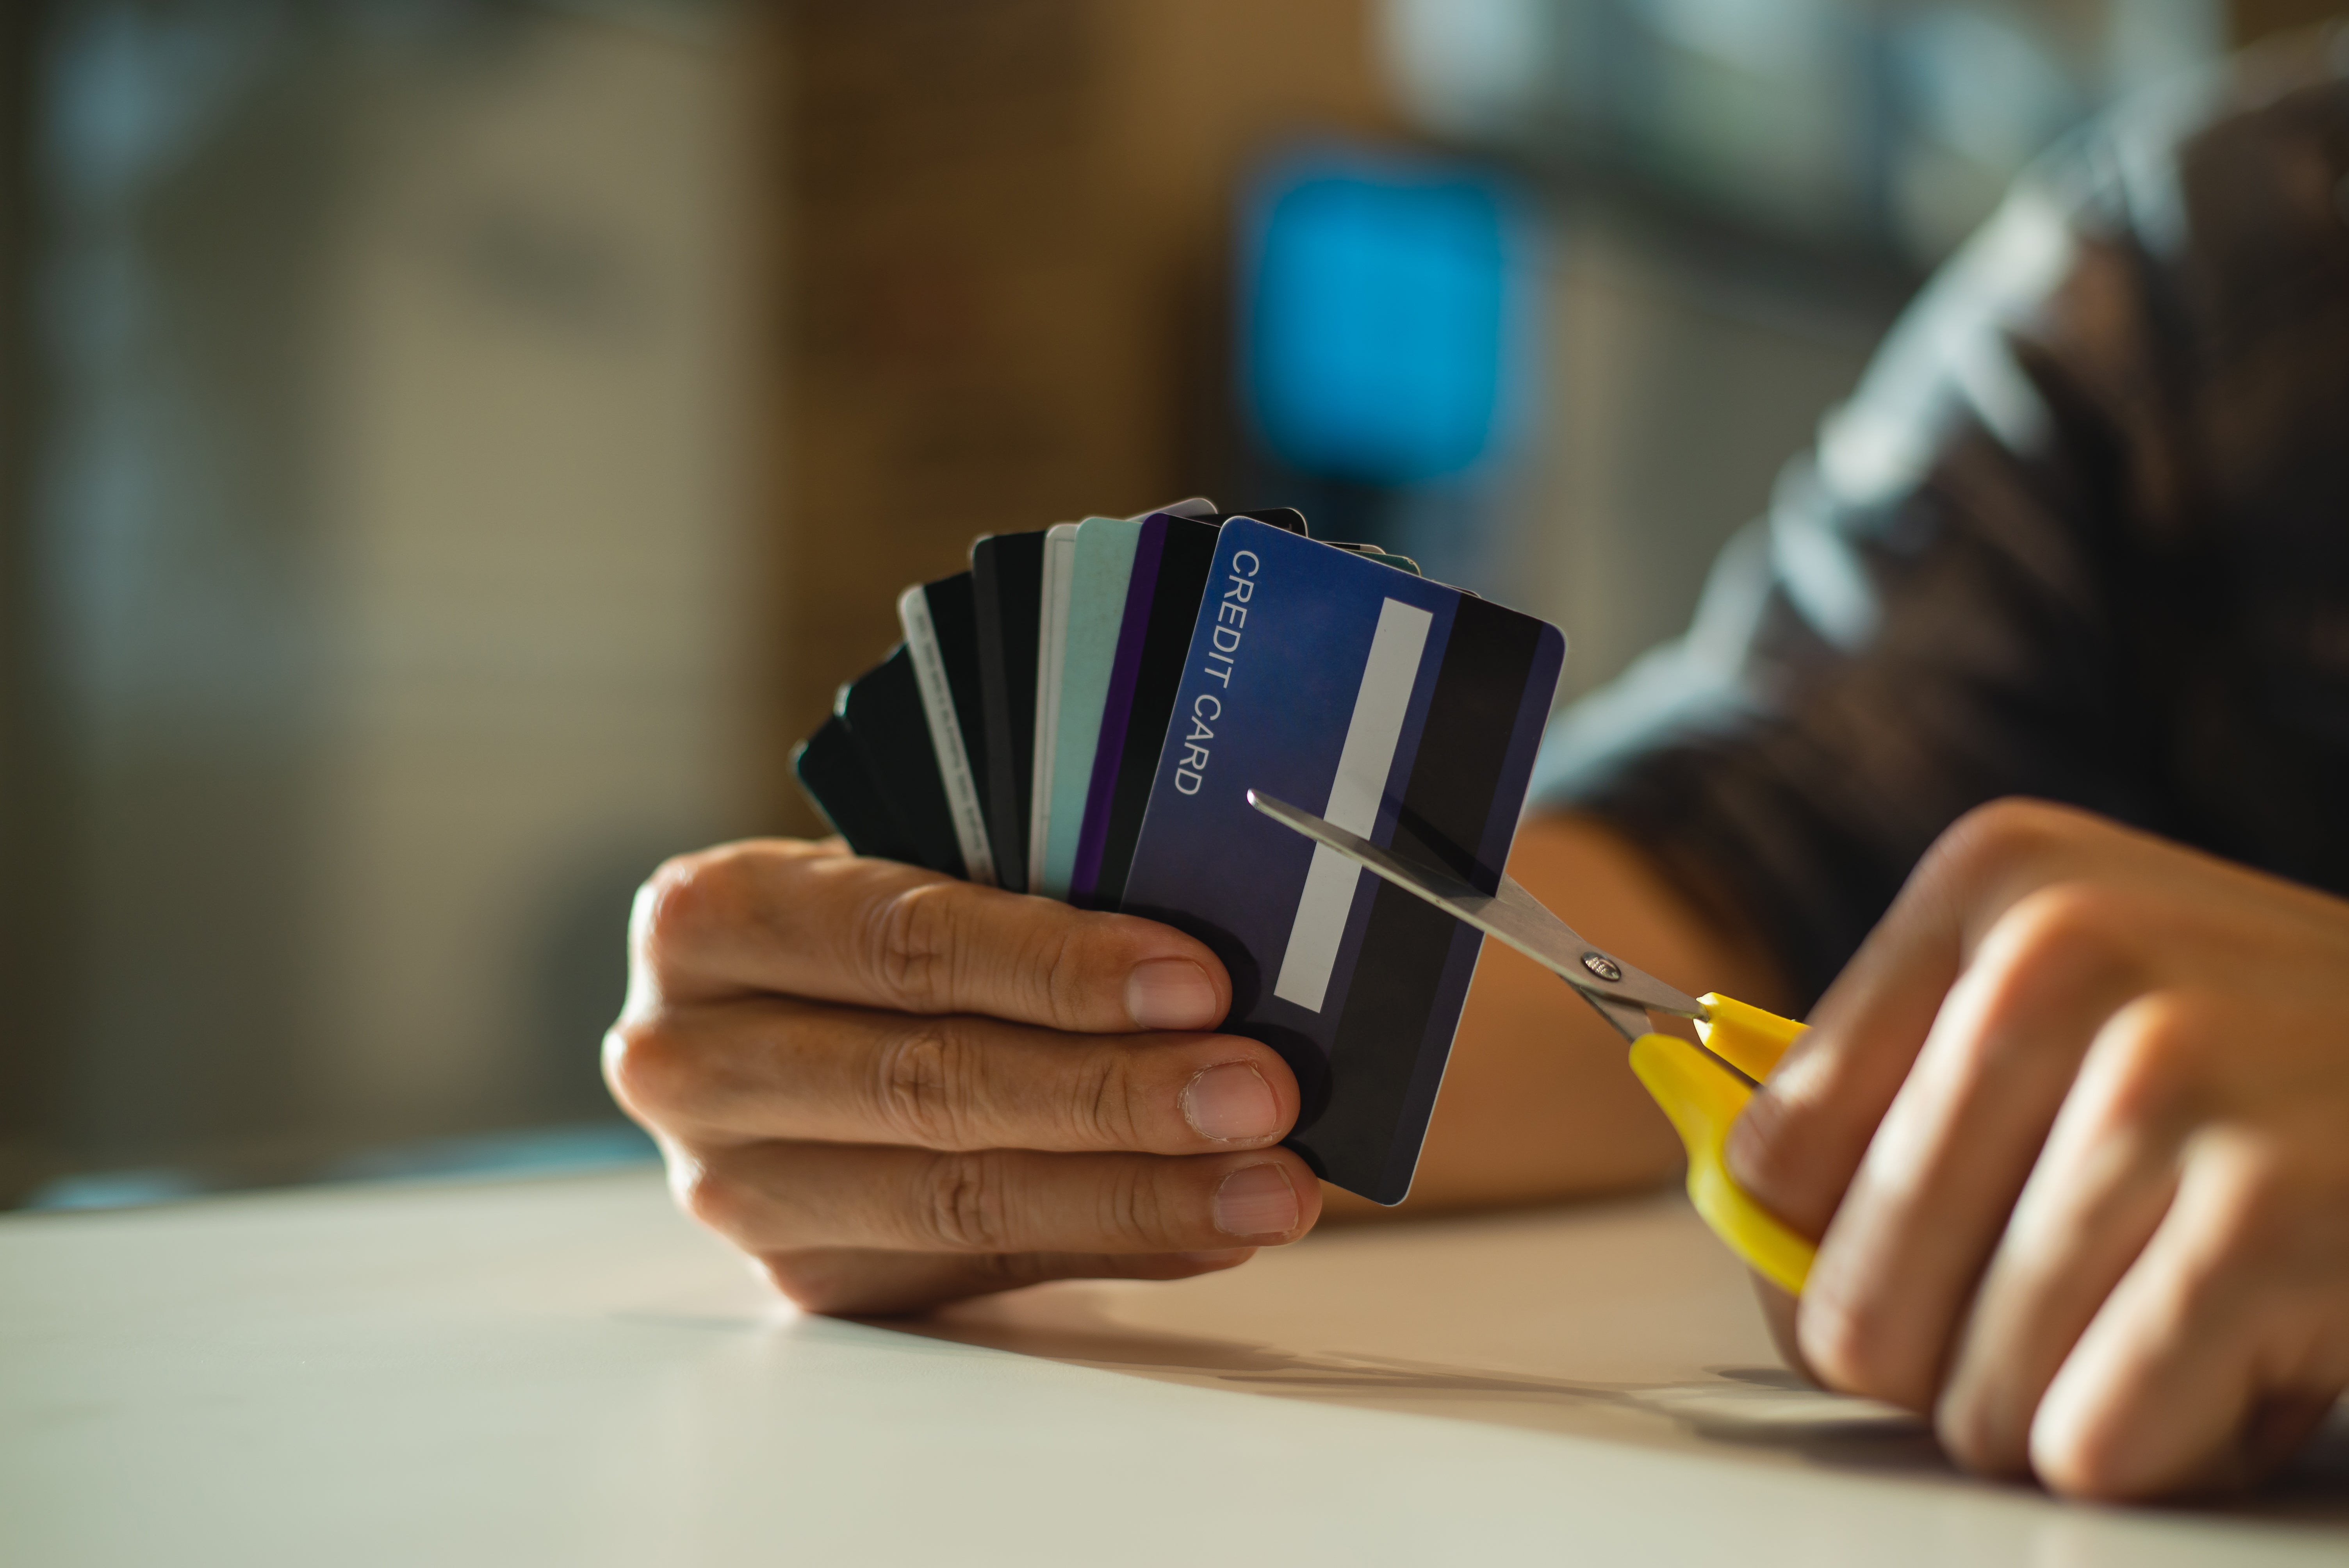 Beyond cards: Consumers and businesses will soon be able to embrace instant payments, simpler cost structures and additional, flexible services